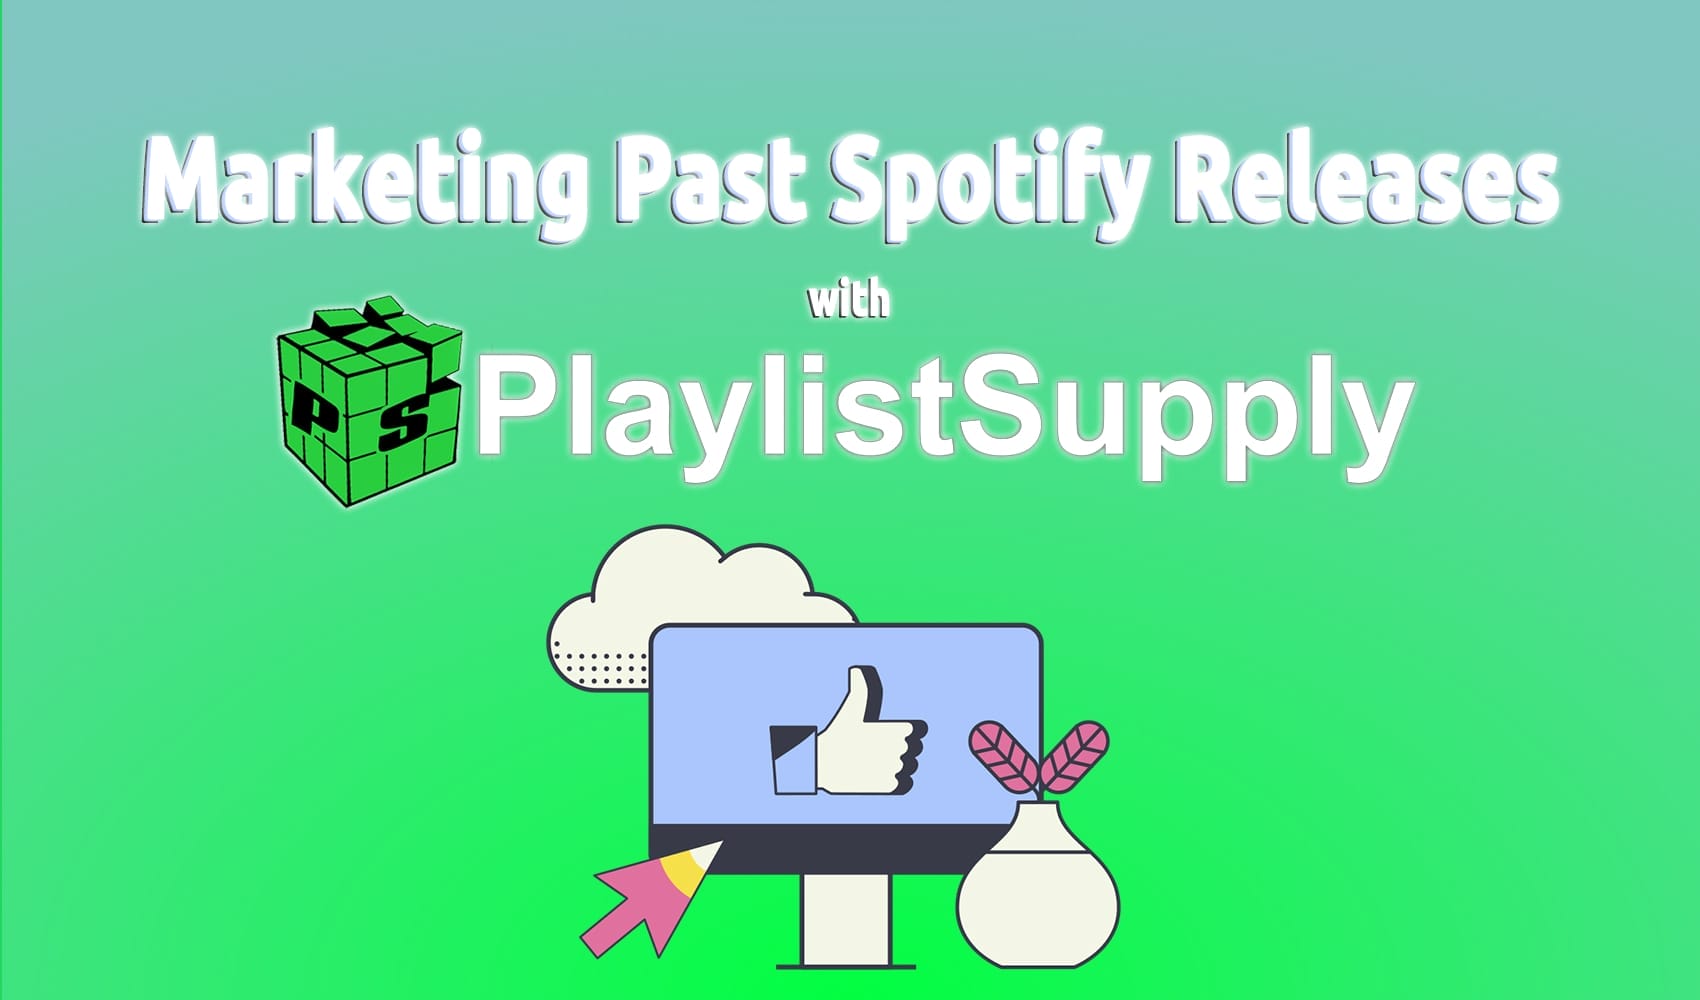 Marketing Past Spotify Releases with PlaylistSupply